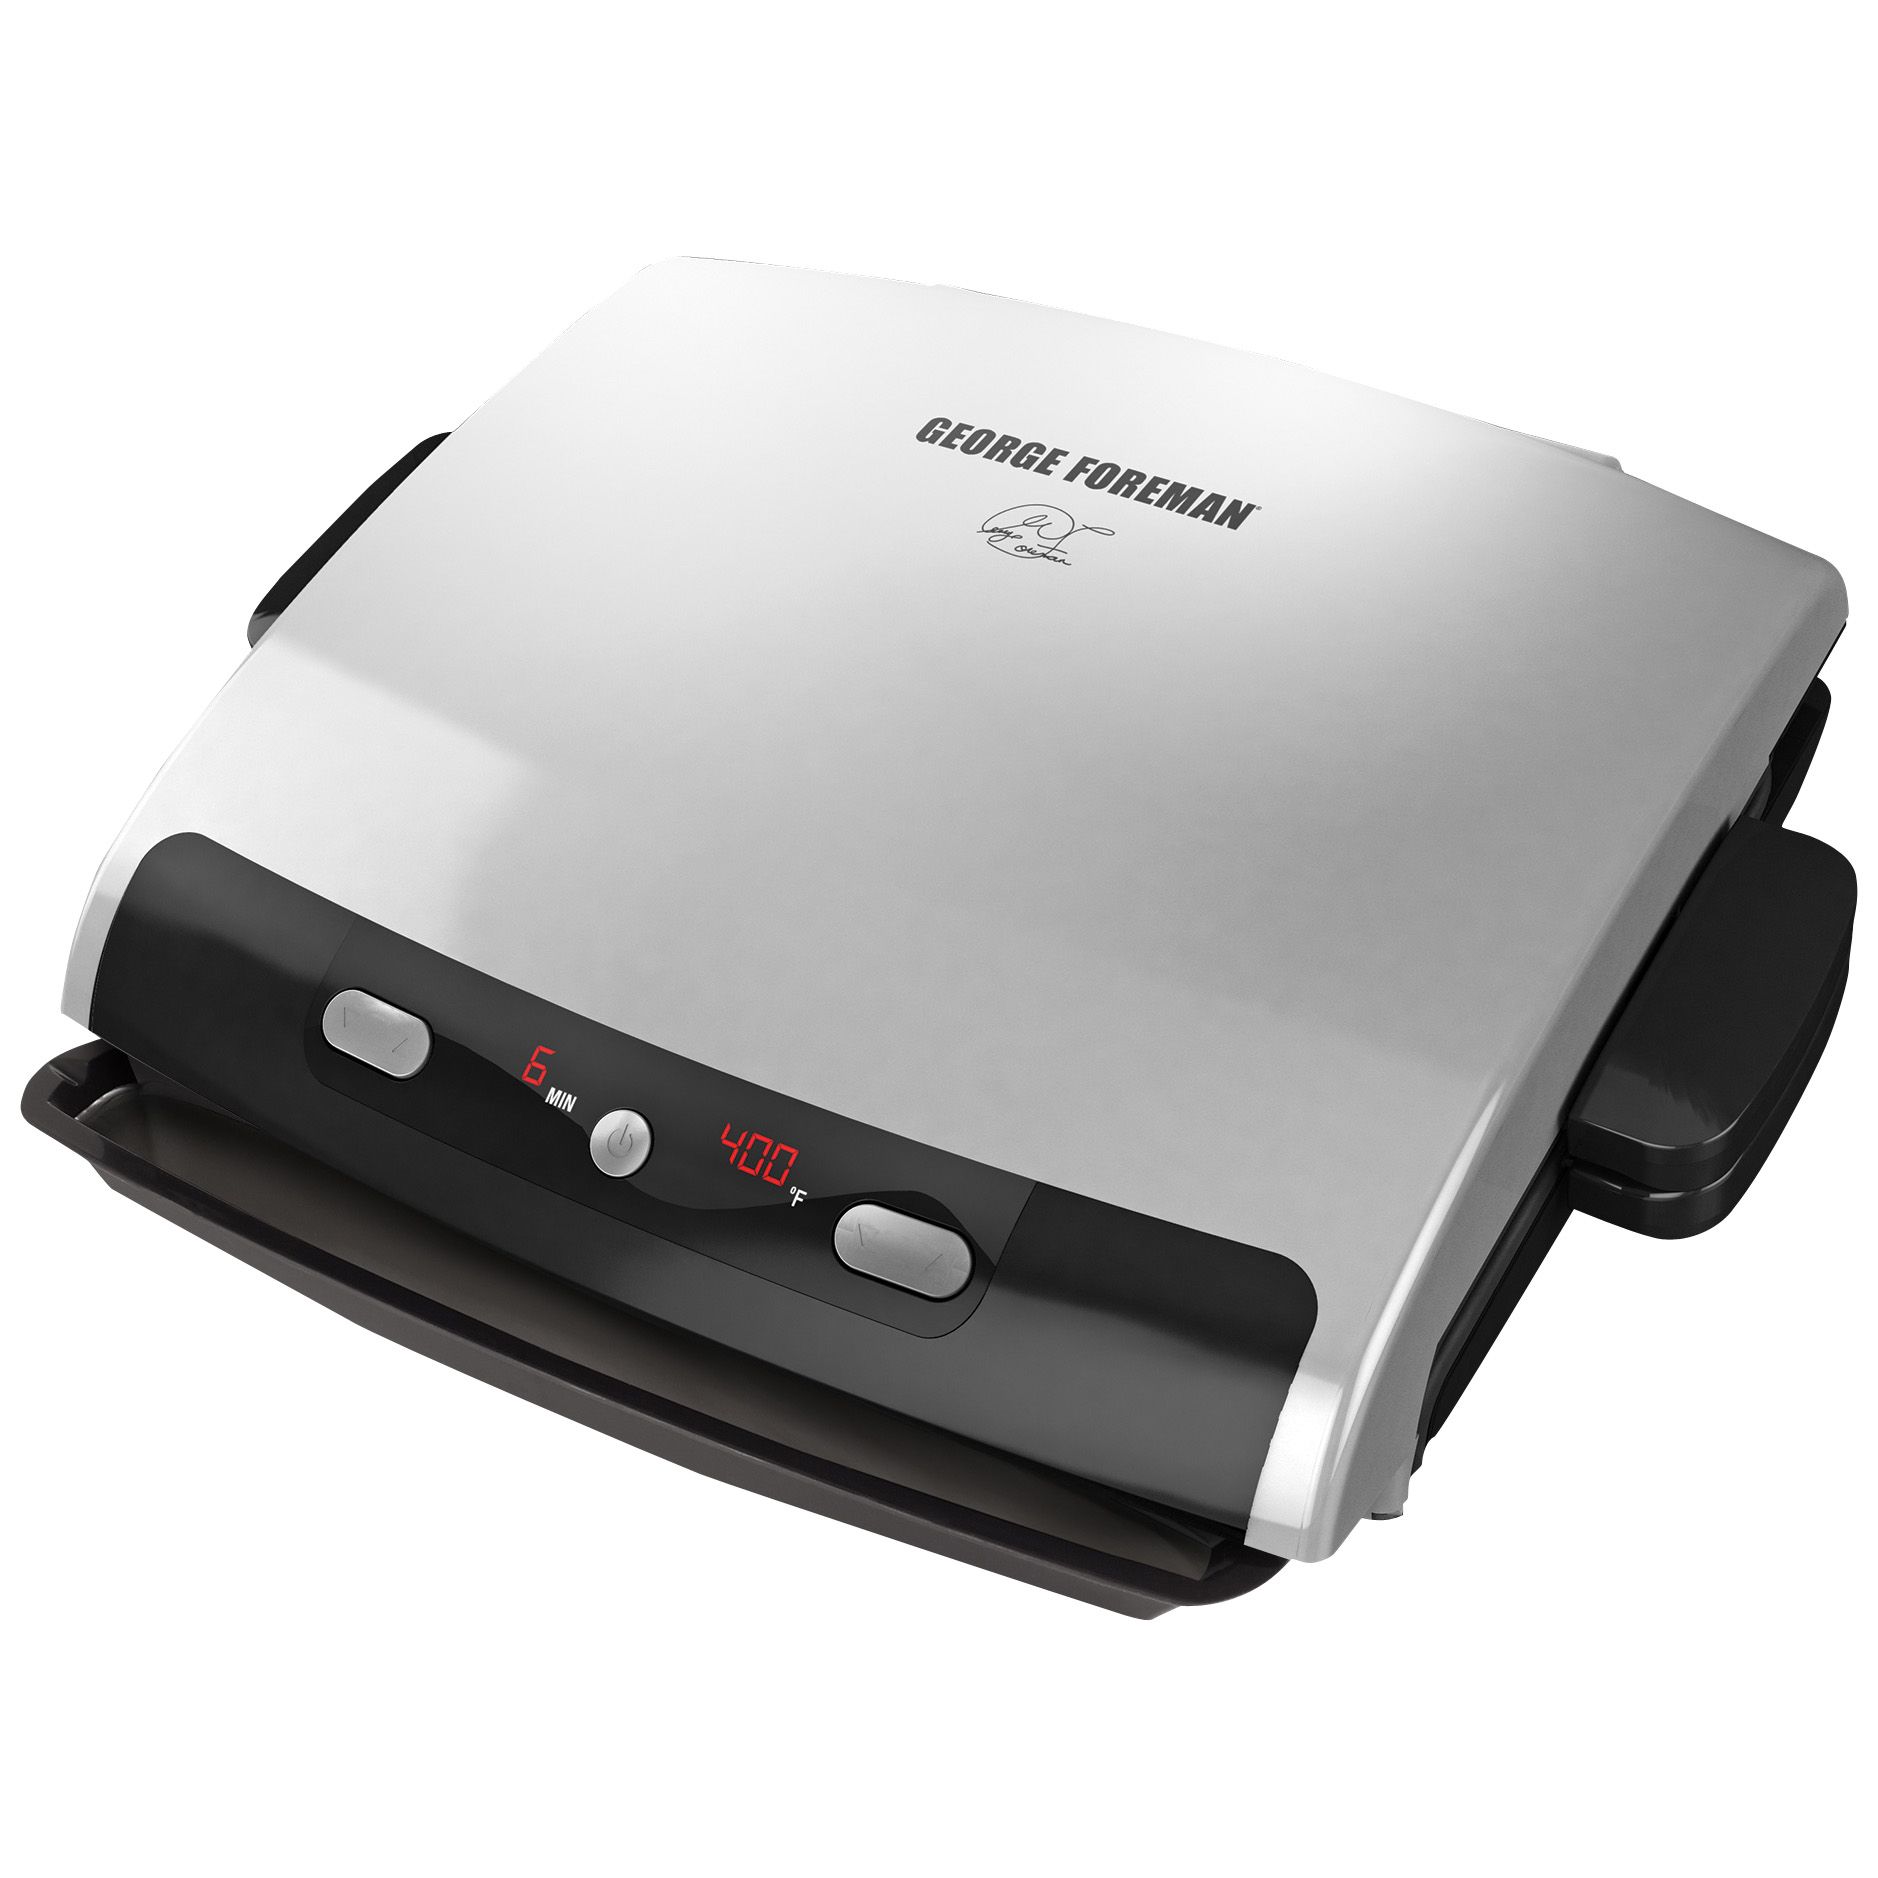 The George Foreman Grill Changed the Way Men Cook Forever